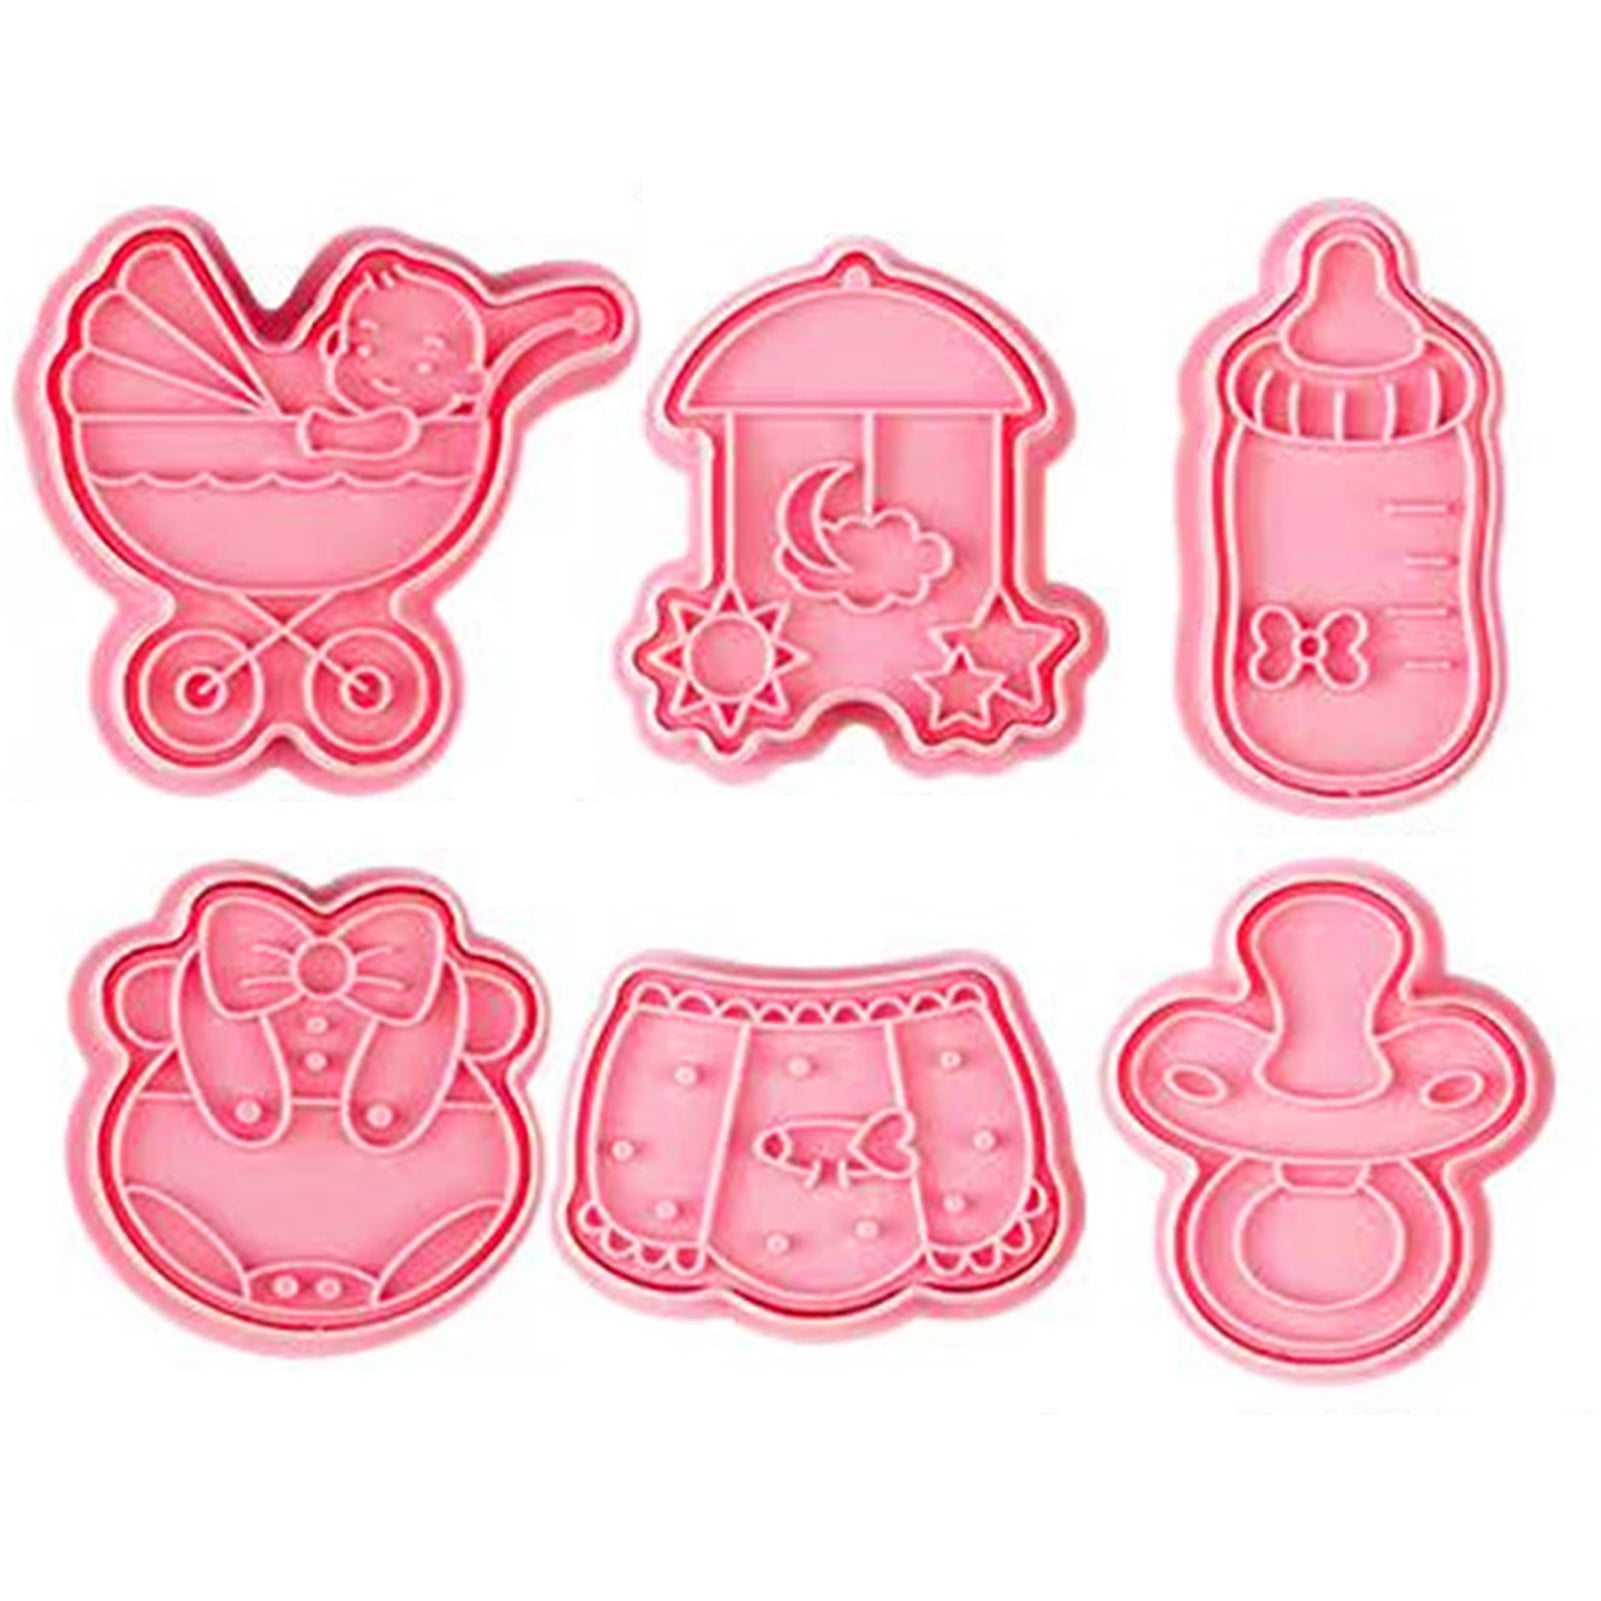 Xinhuadsh Cookie Stamps Flexible 6pcs/set Baby Shower Biscuit Cutter Multi-function Practical Kitchen Accessories, Pink